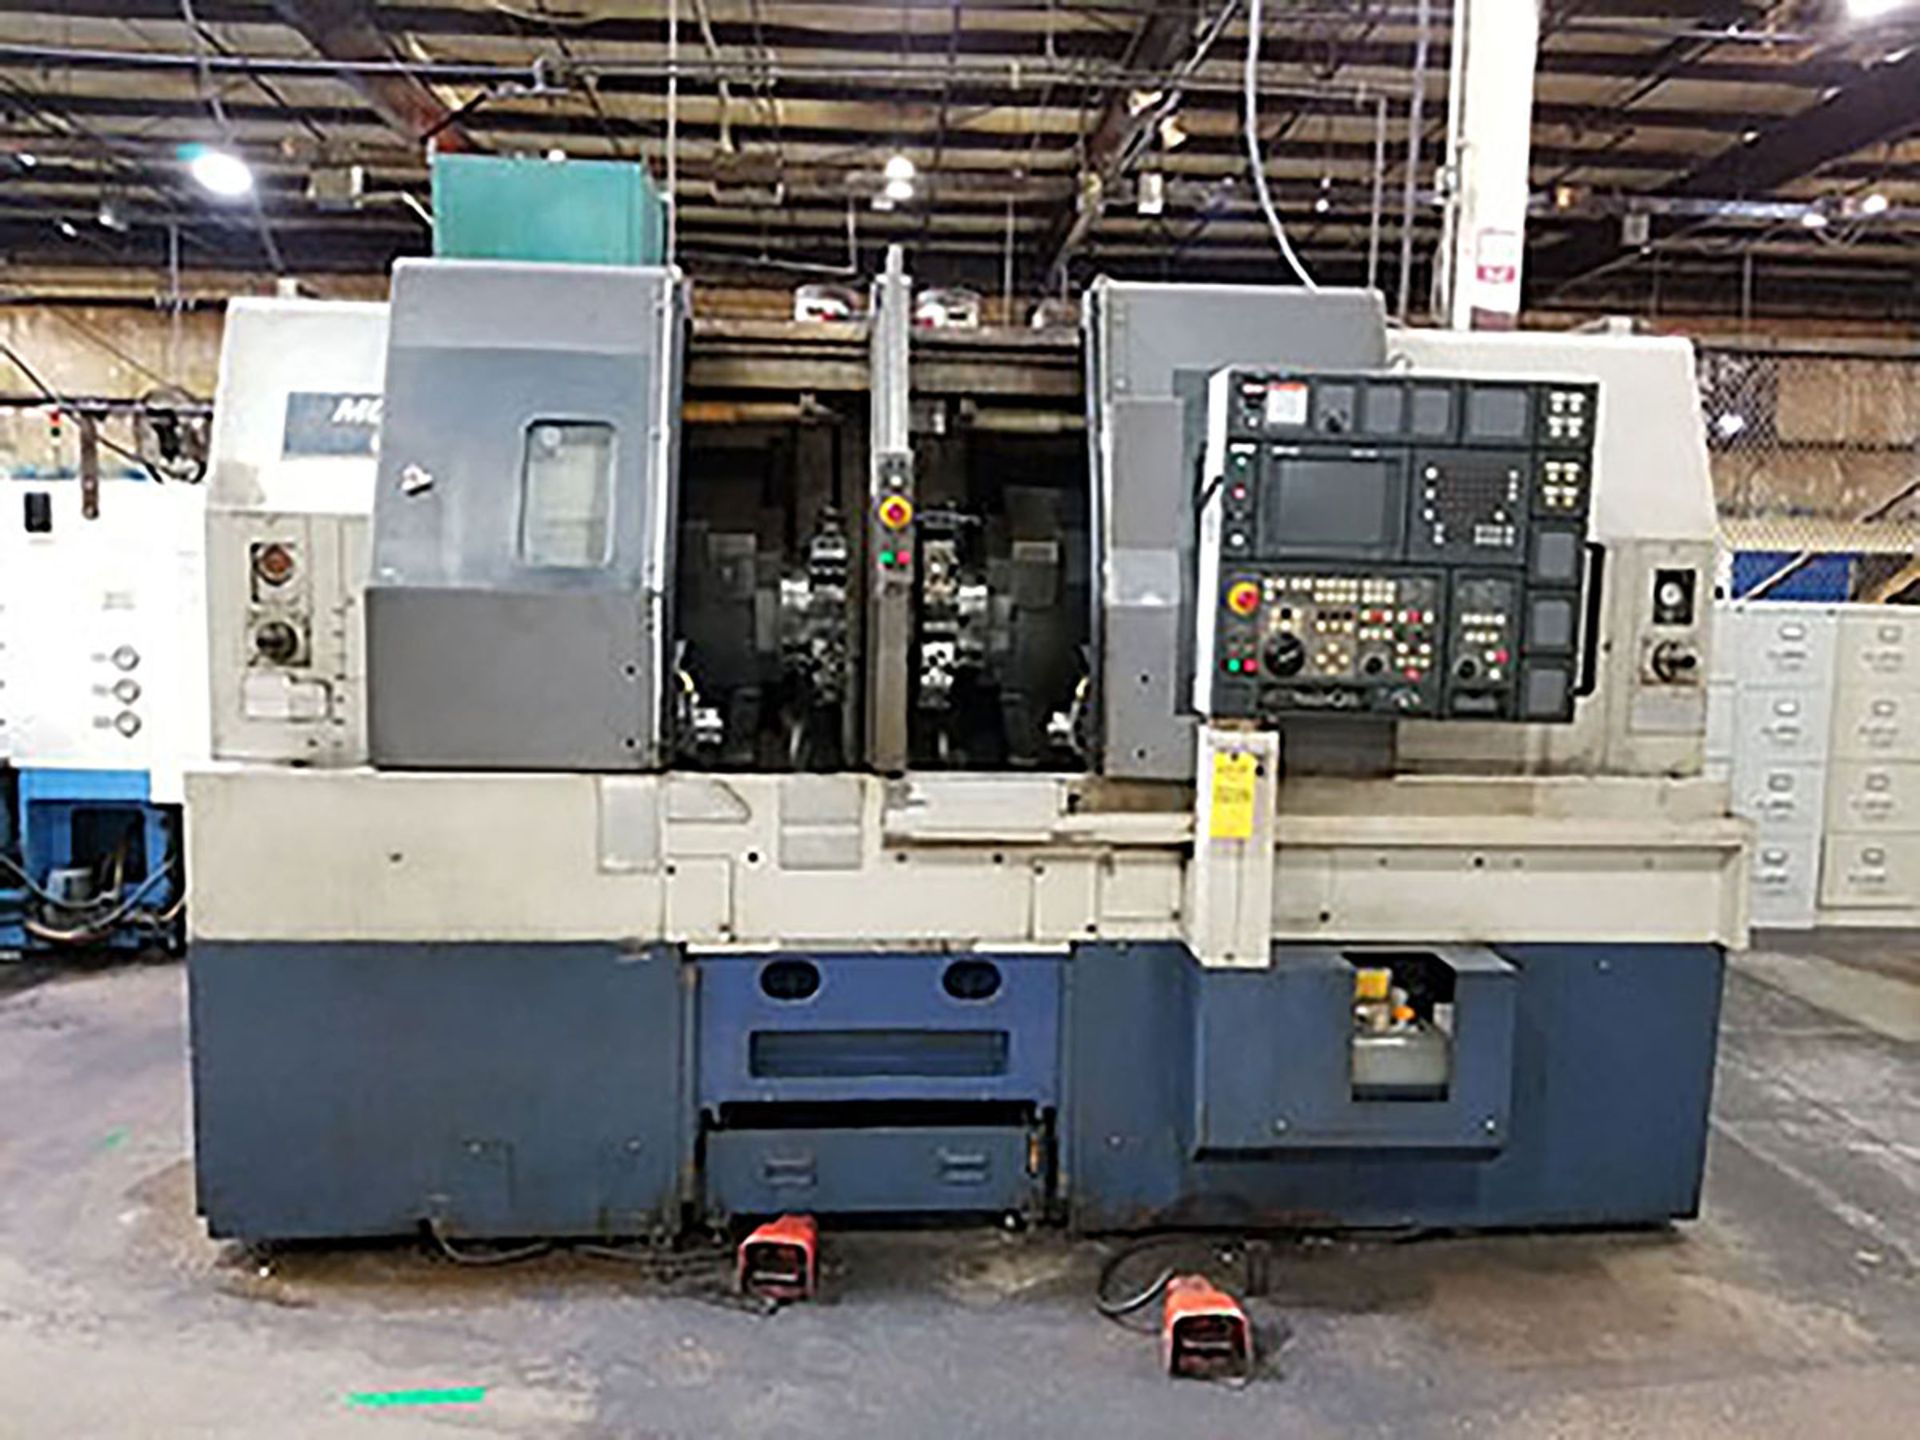 2000 MORI SEKI DL151 4-AXIS CNC TURNING CENTER; DUAL SPINDLE, (2) 12-POSITION TURRET, COOLANT,